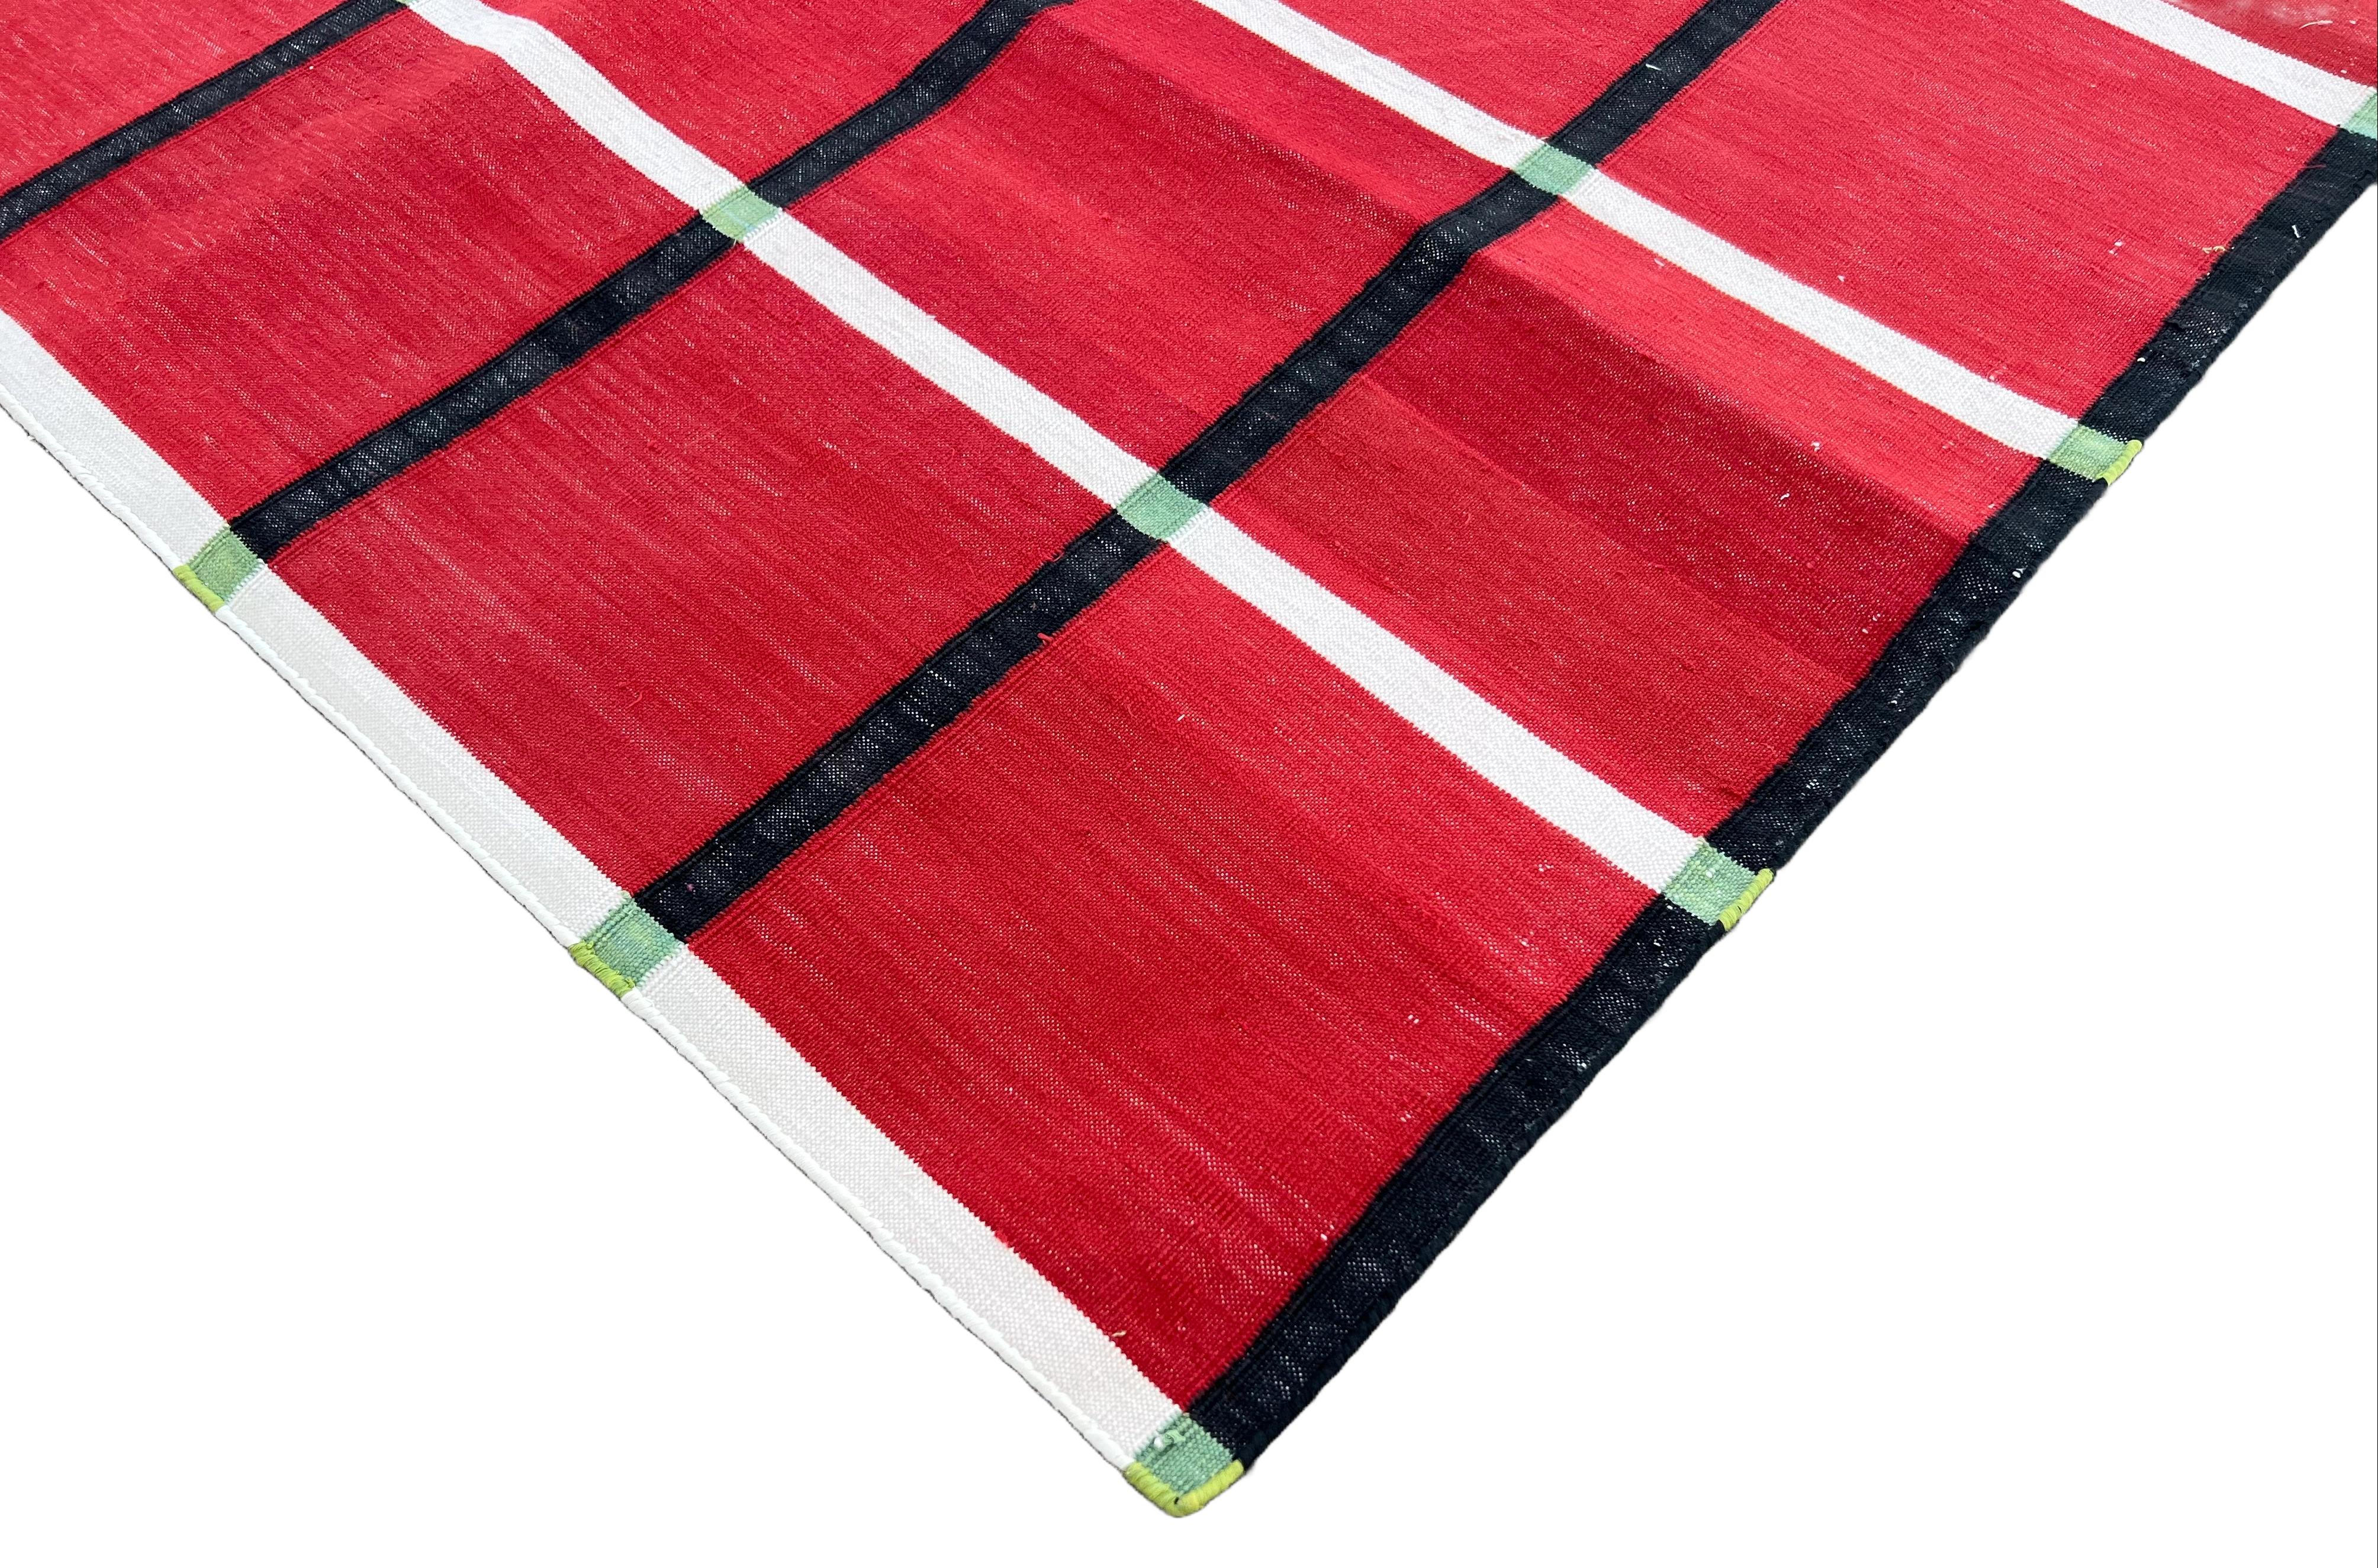 Mid-Century Modern Handmade Cotton Area Flat Weave Rug, Red & Black Windowpane Check Indian Dhurrie For Sale